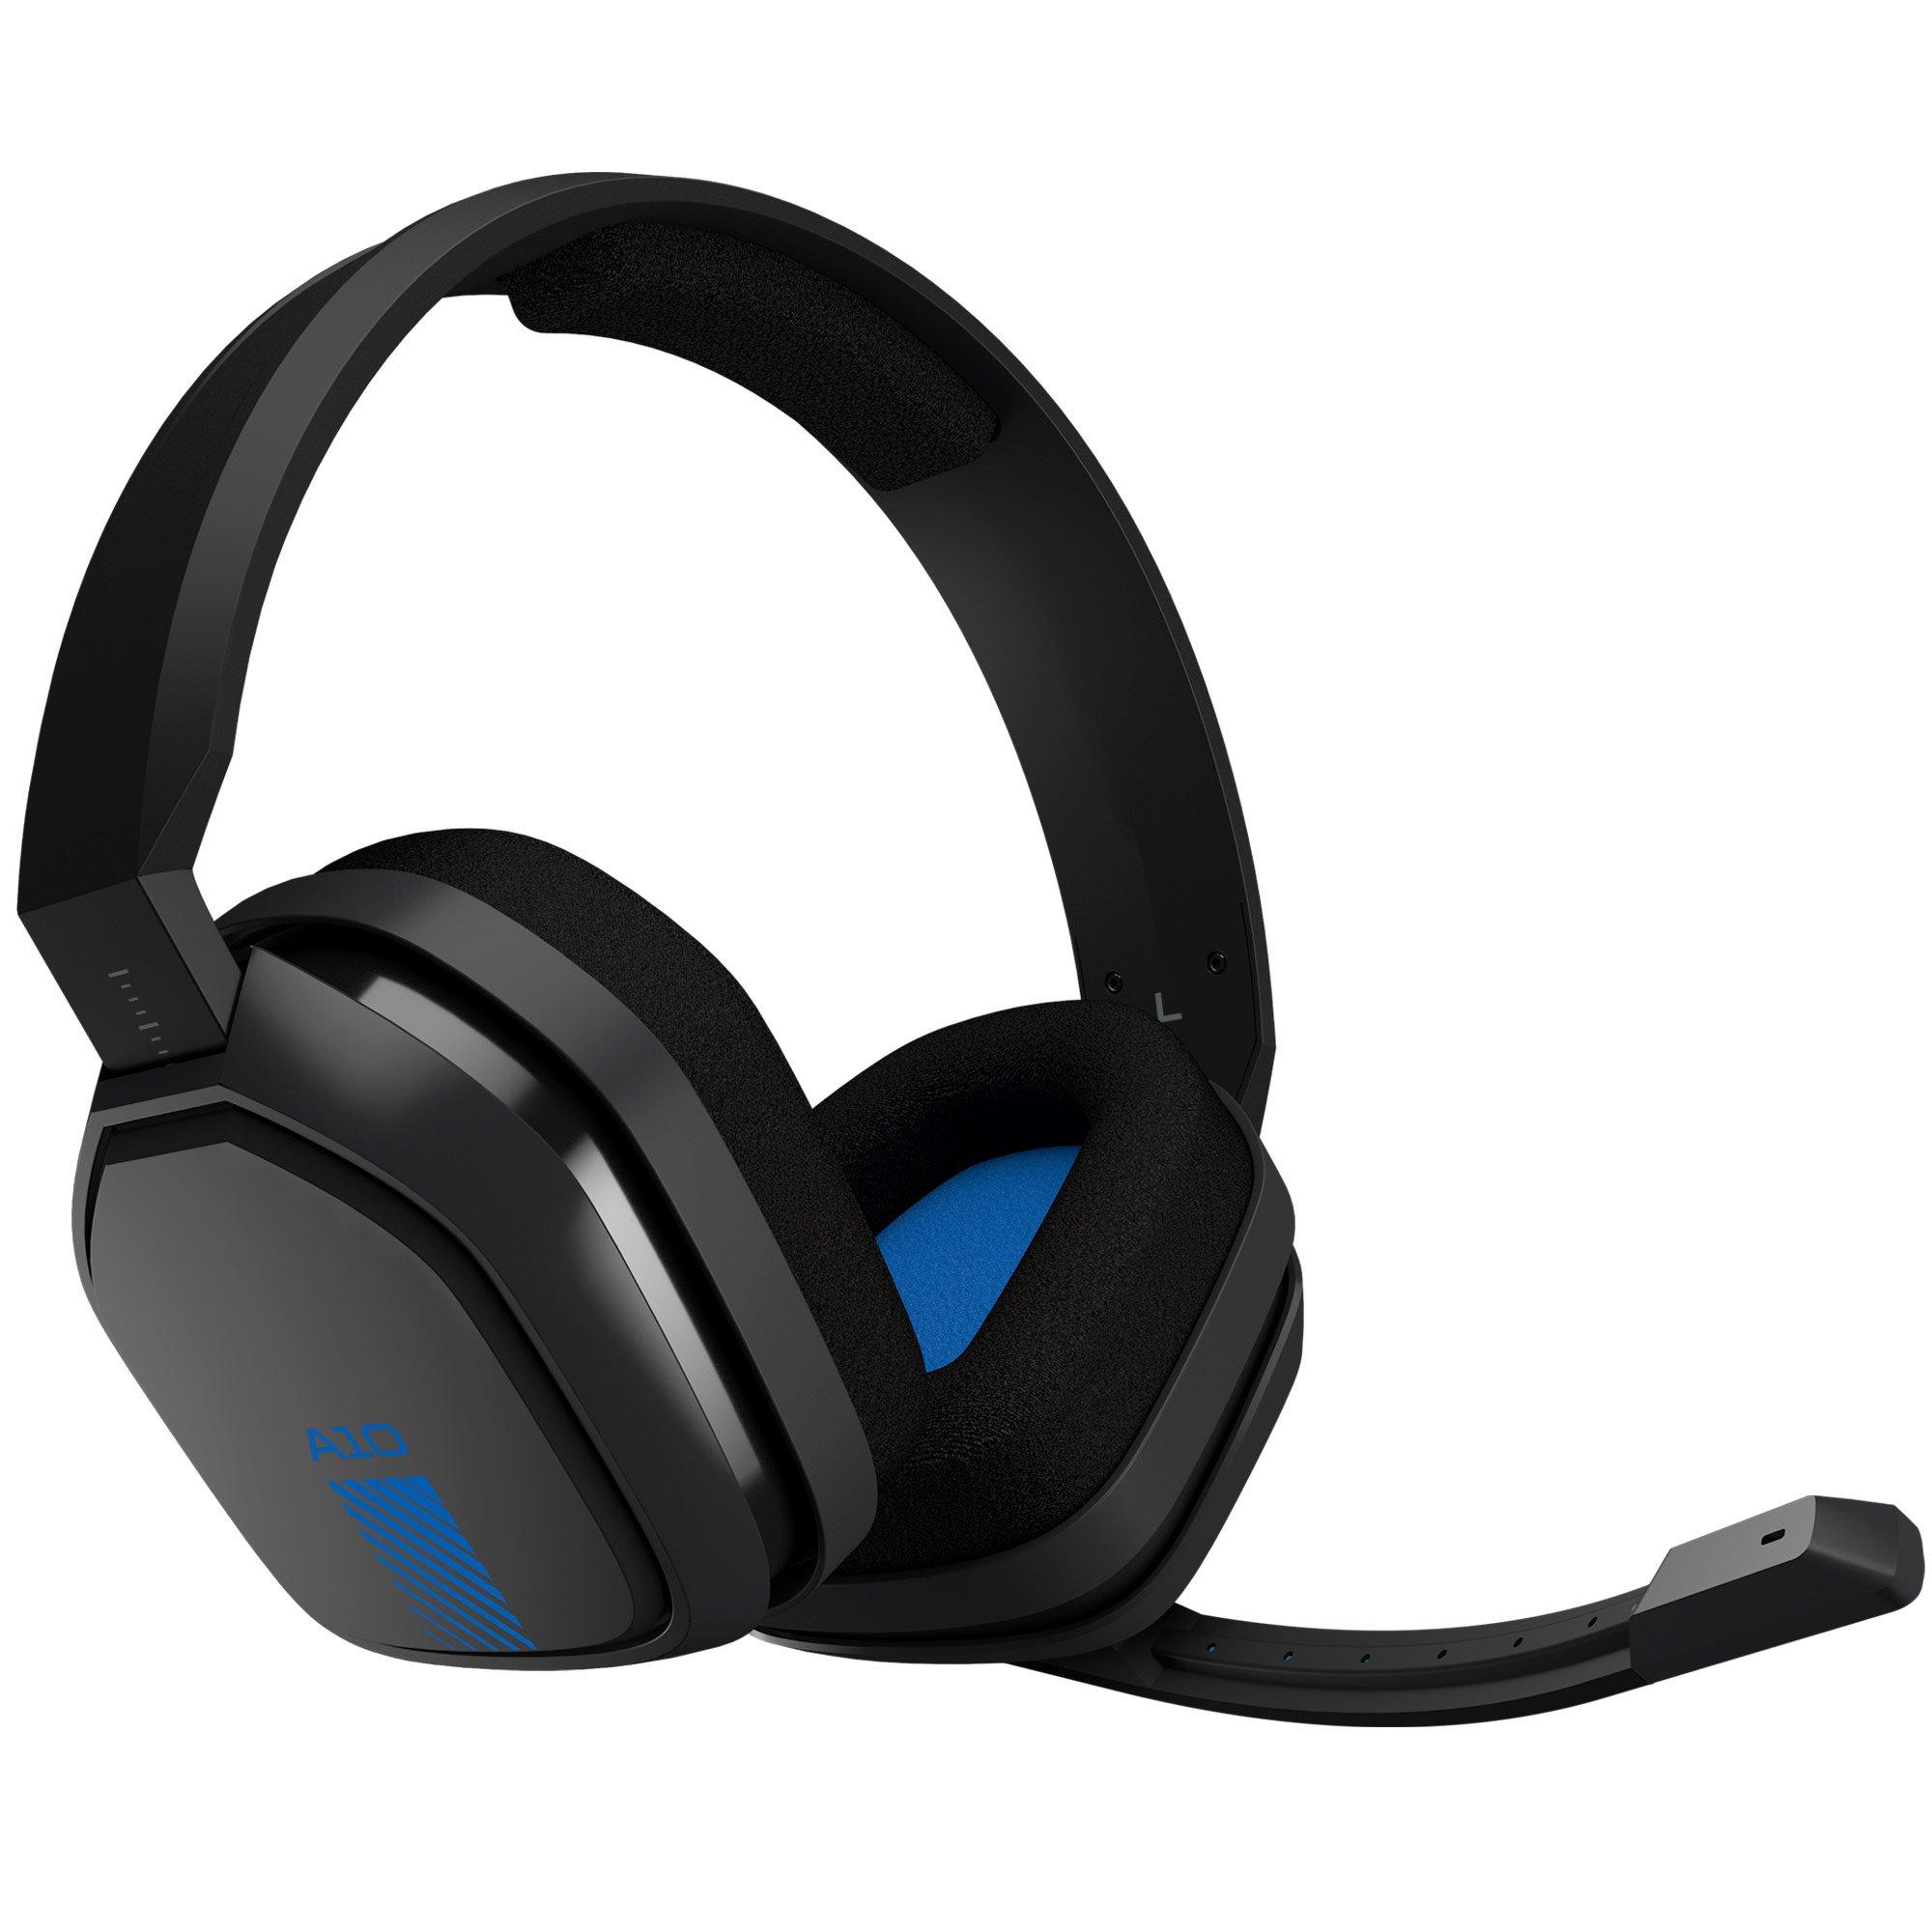 headphones for the playstation 4